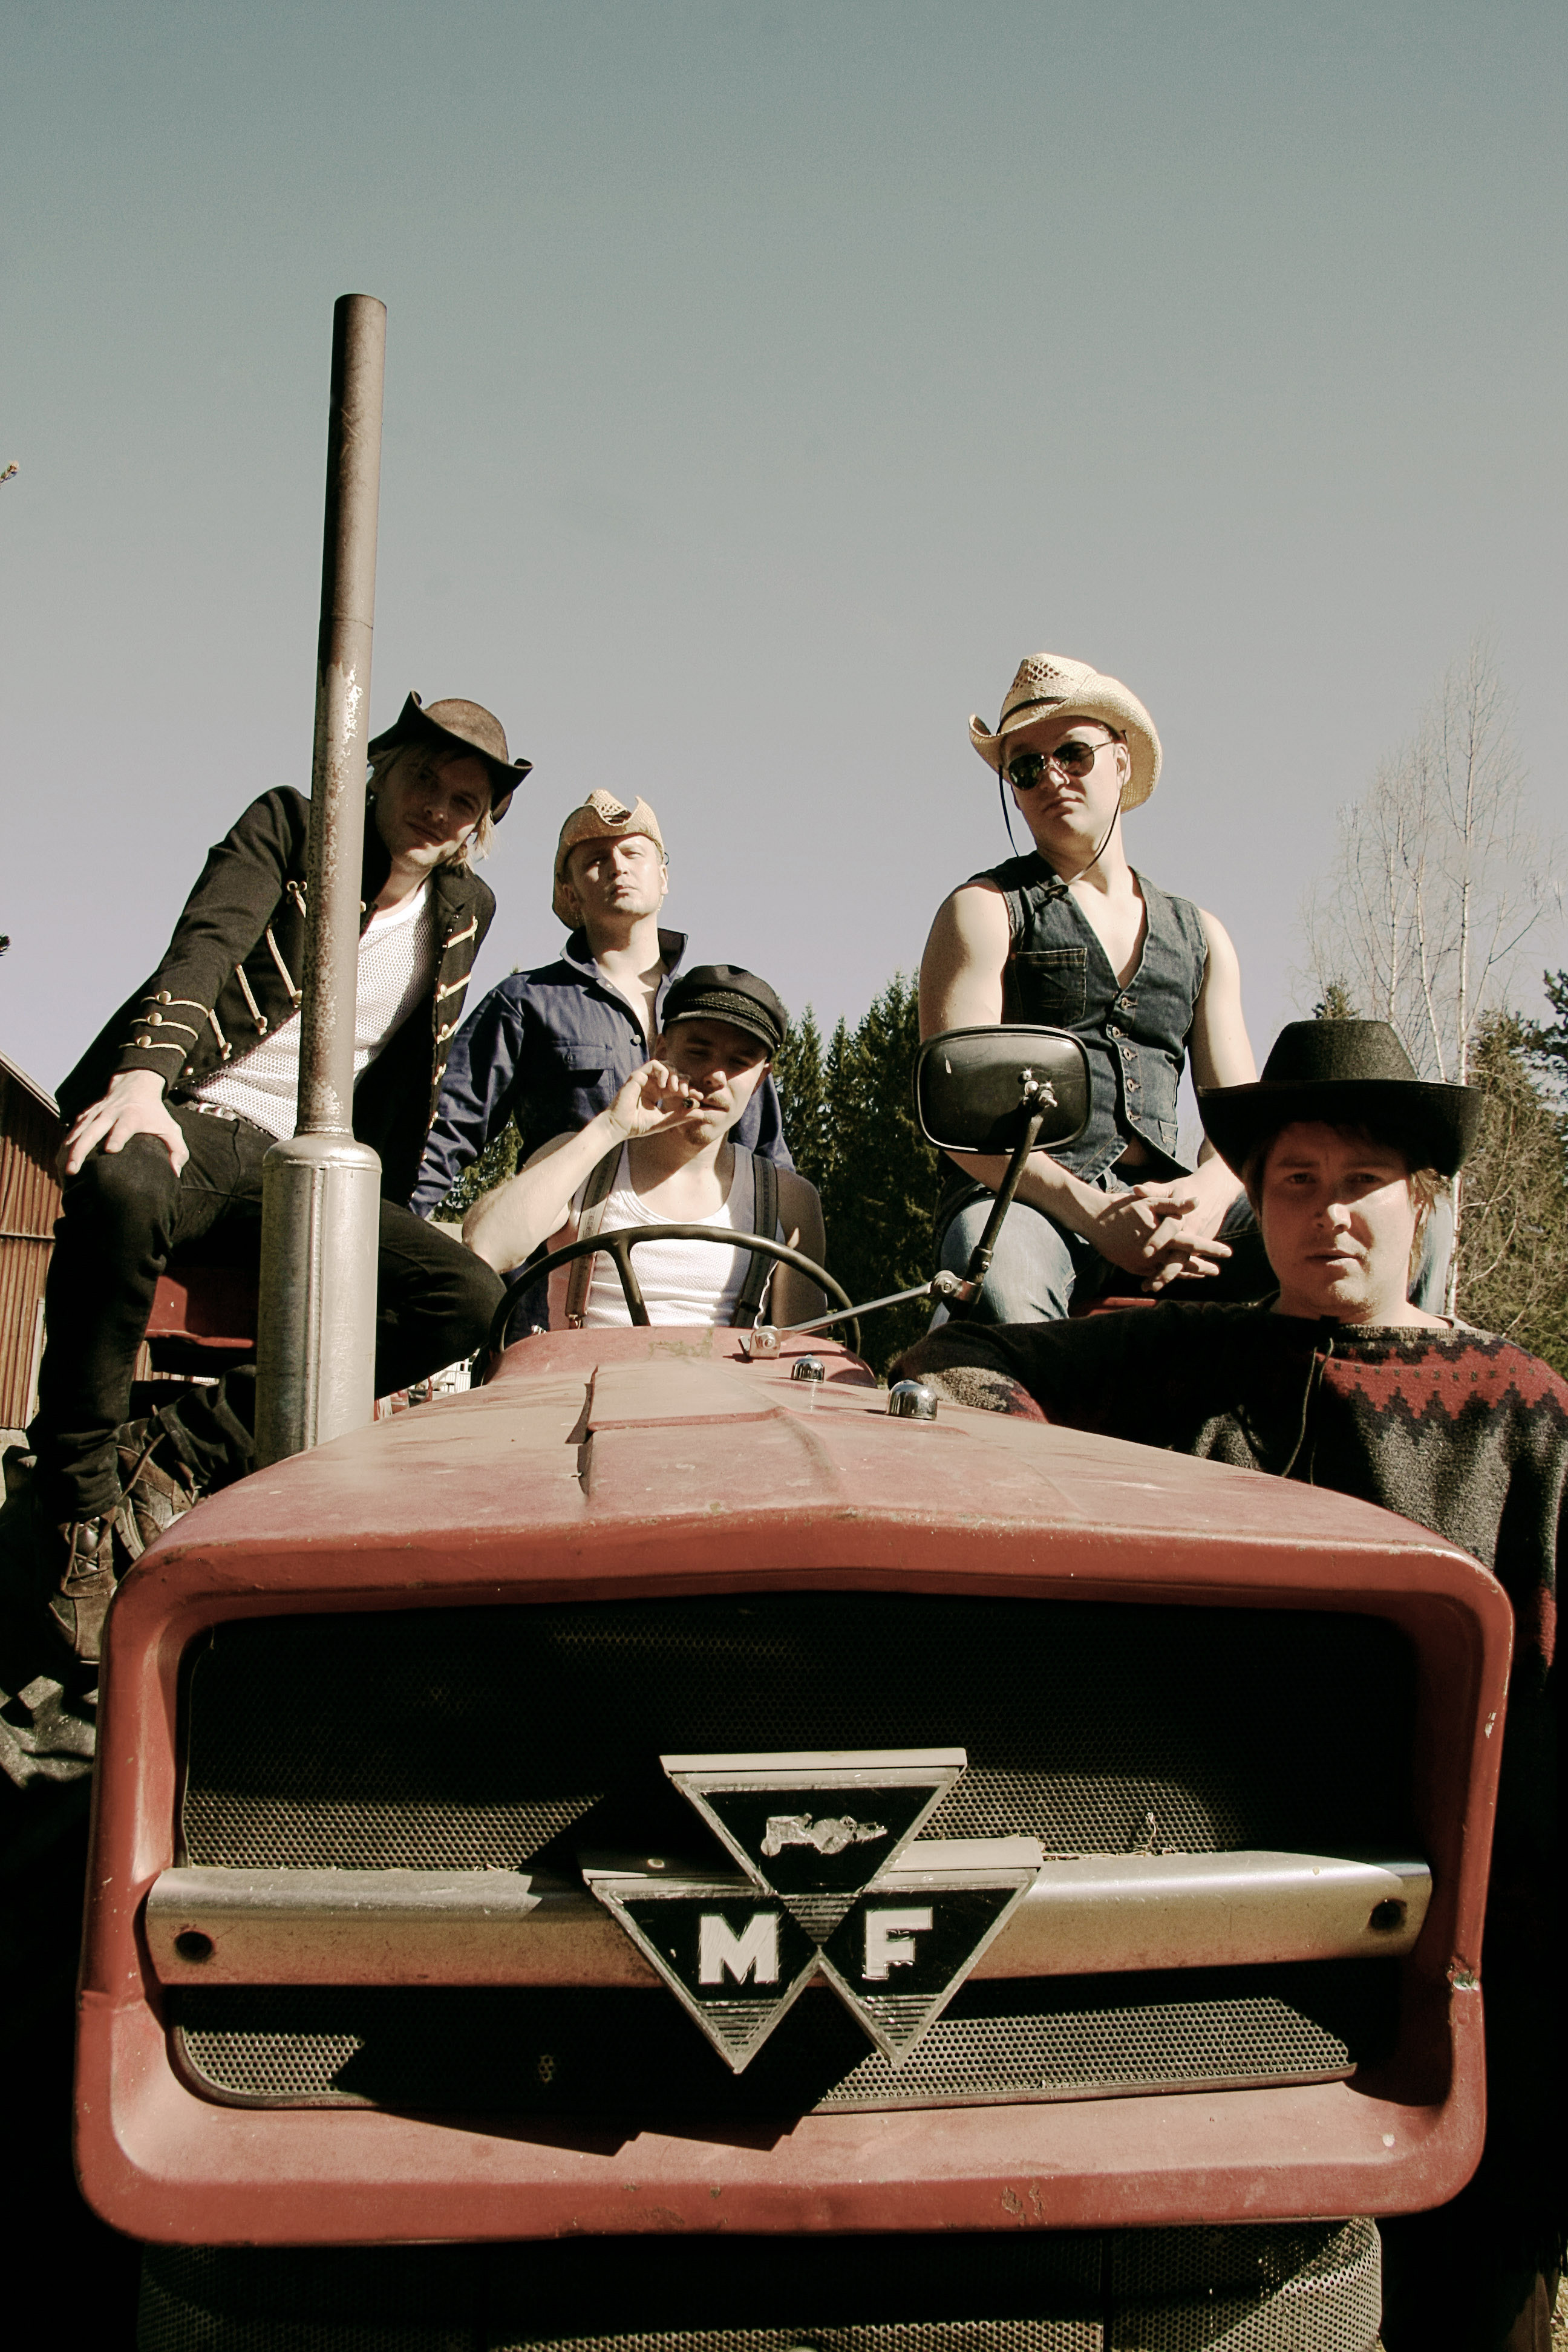 Steve-N-Seagulls - NEW DISCOVERY for the month of October 2015 at Music Charts Magazine - If you listen to the new album "Farm Machine" you will know what we mean!